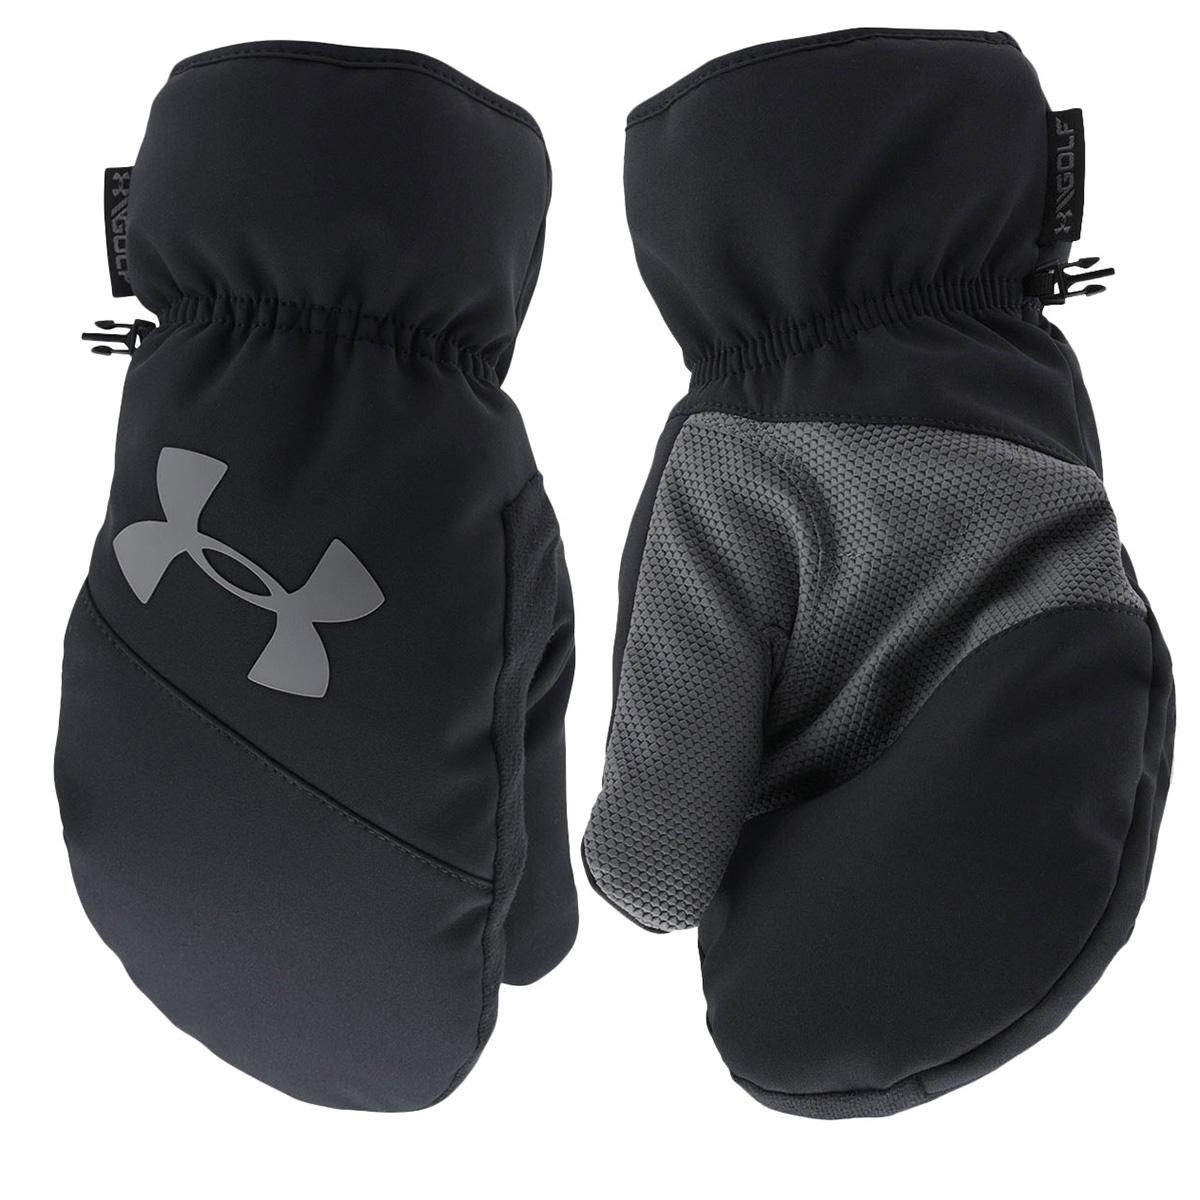 Under Armour Mitts from american golf